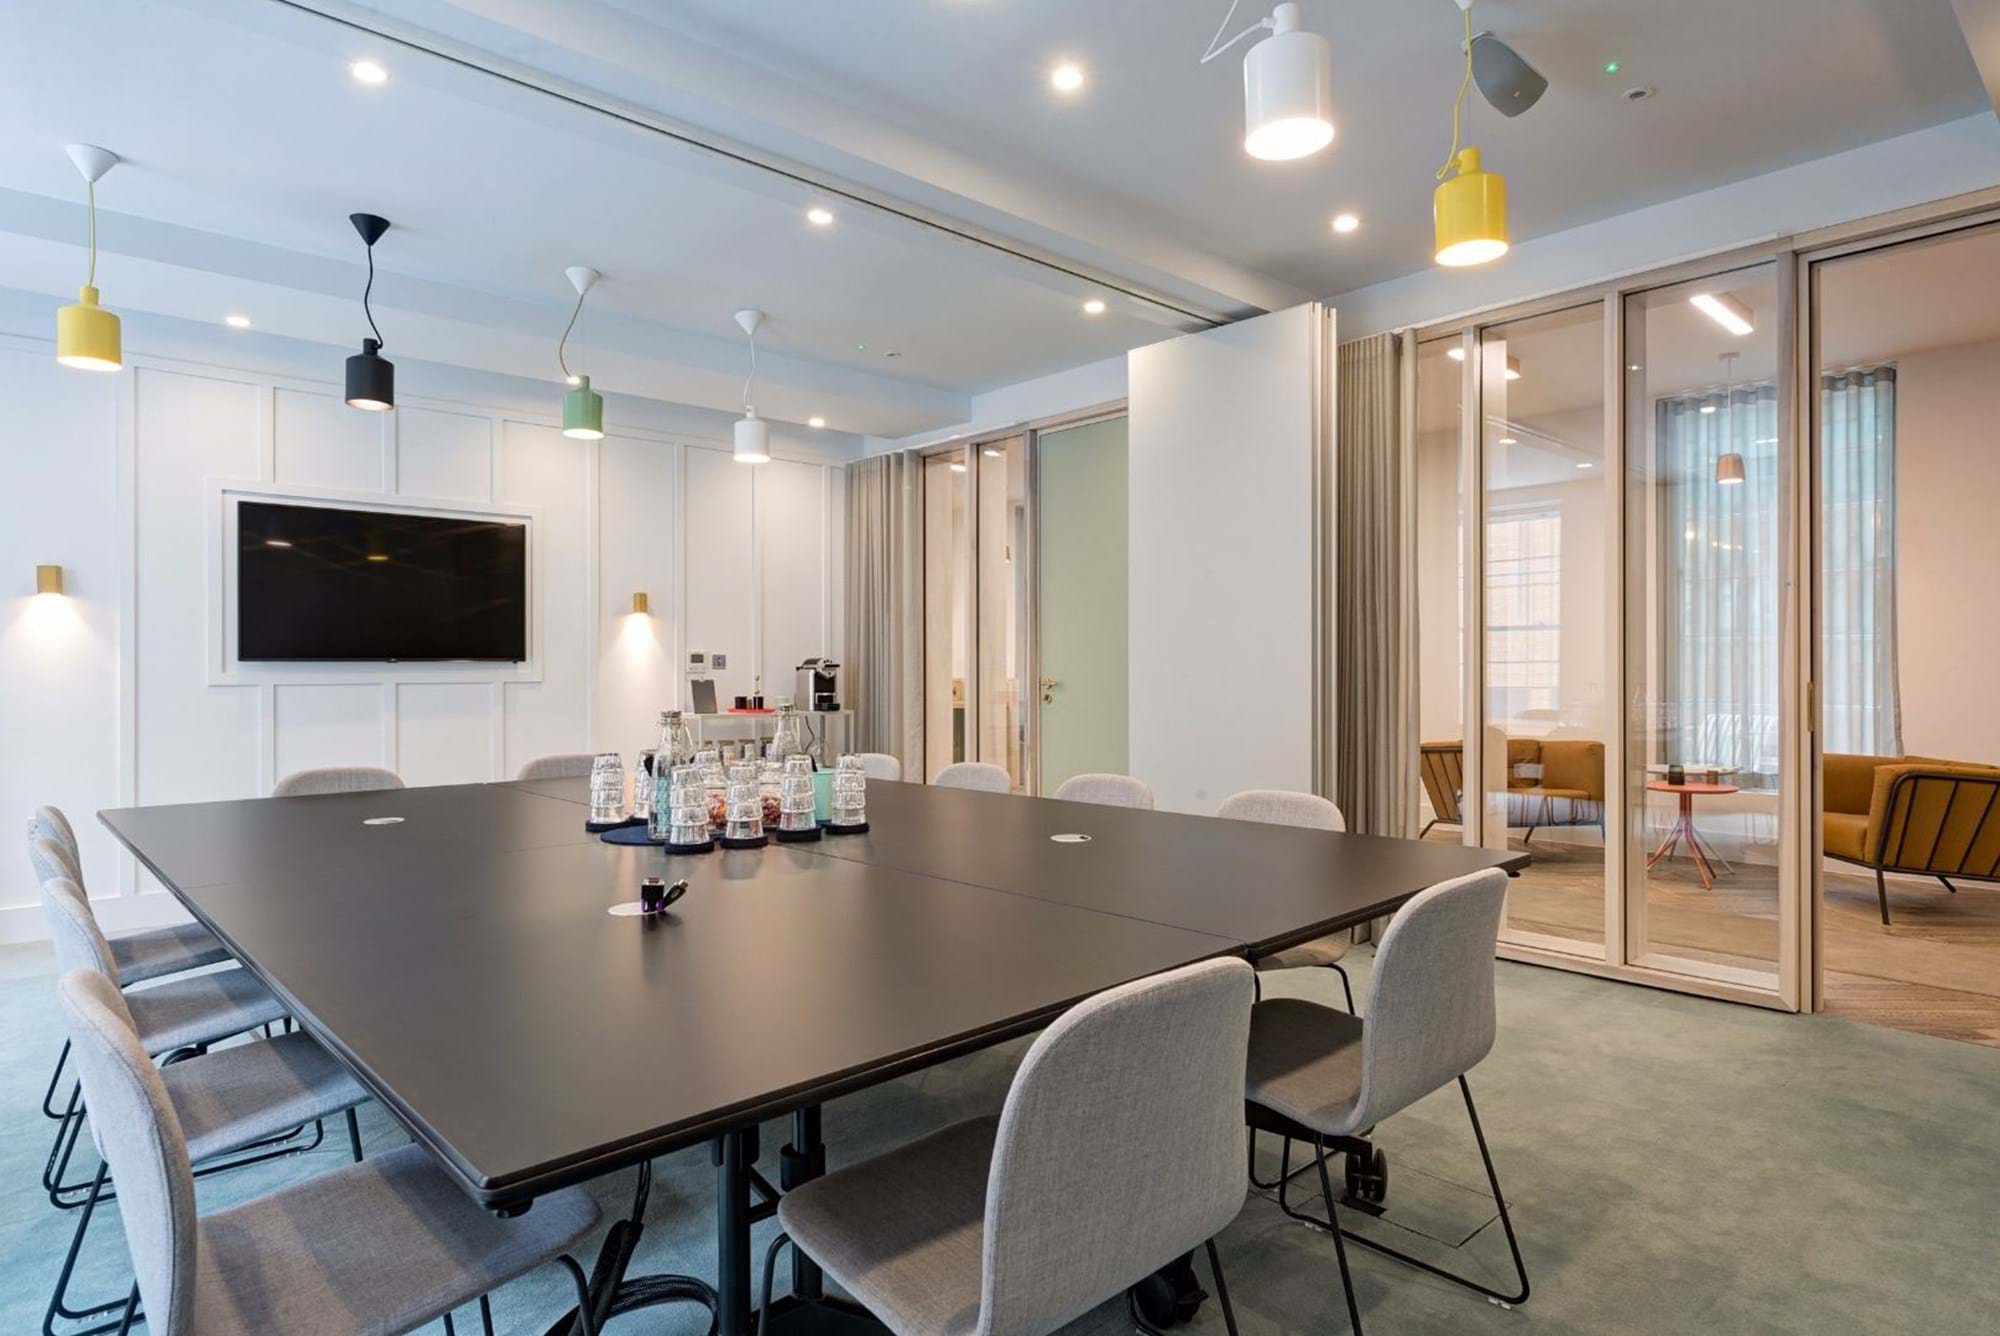 Modus Workspace office design, fit out and refurbishment - TOG - Wimpole Street - TOG Wimpole St 23 highres sRGB.jpg